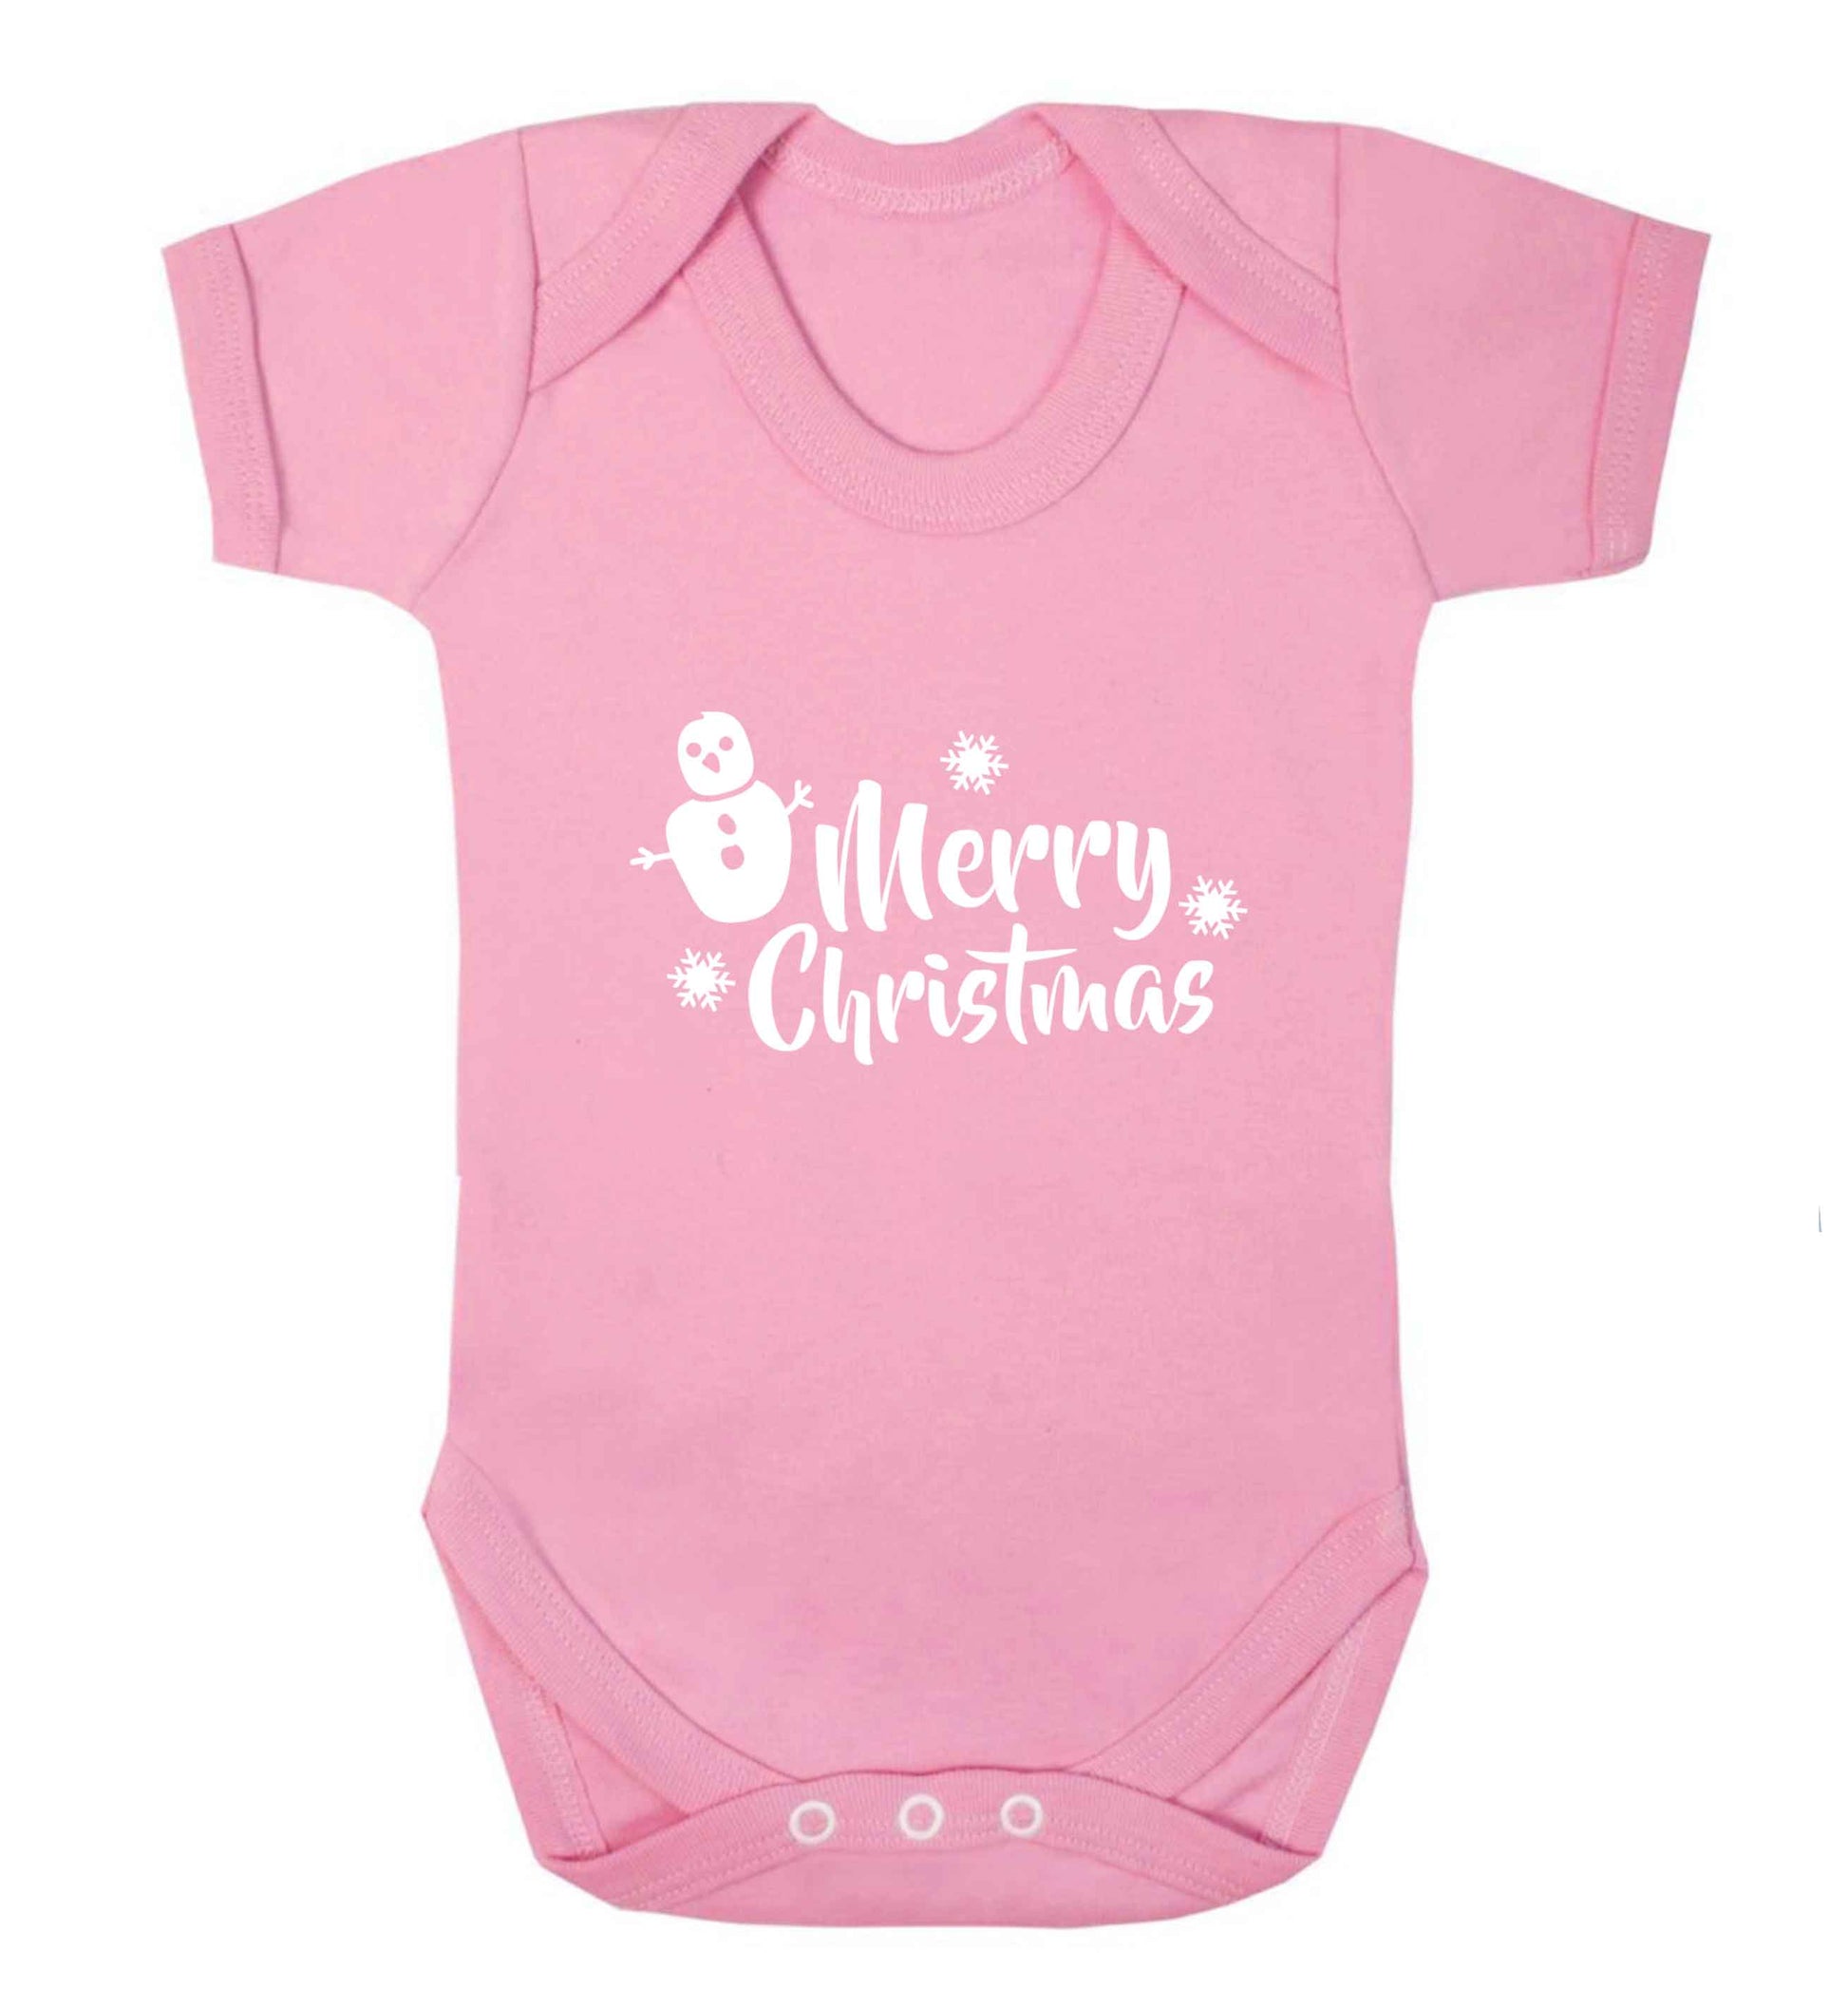 Merry Christmas - snowman baby vest pale pink 18-24 months